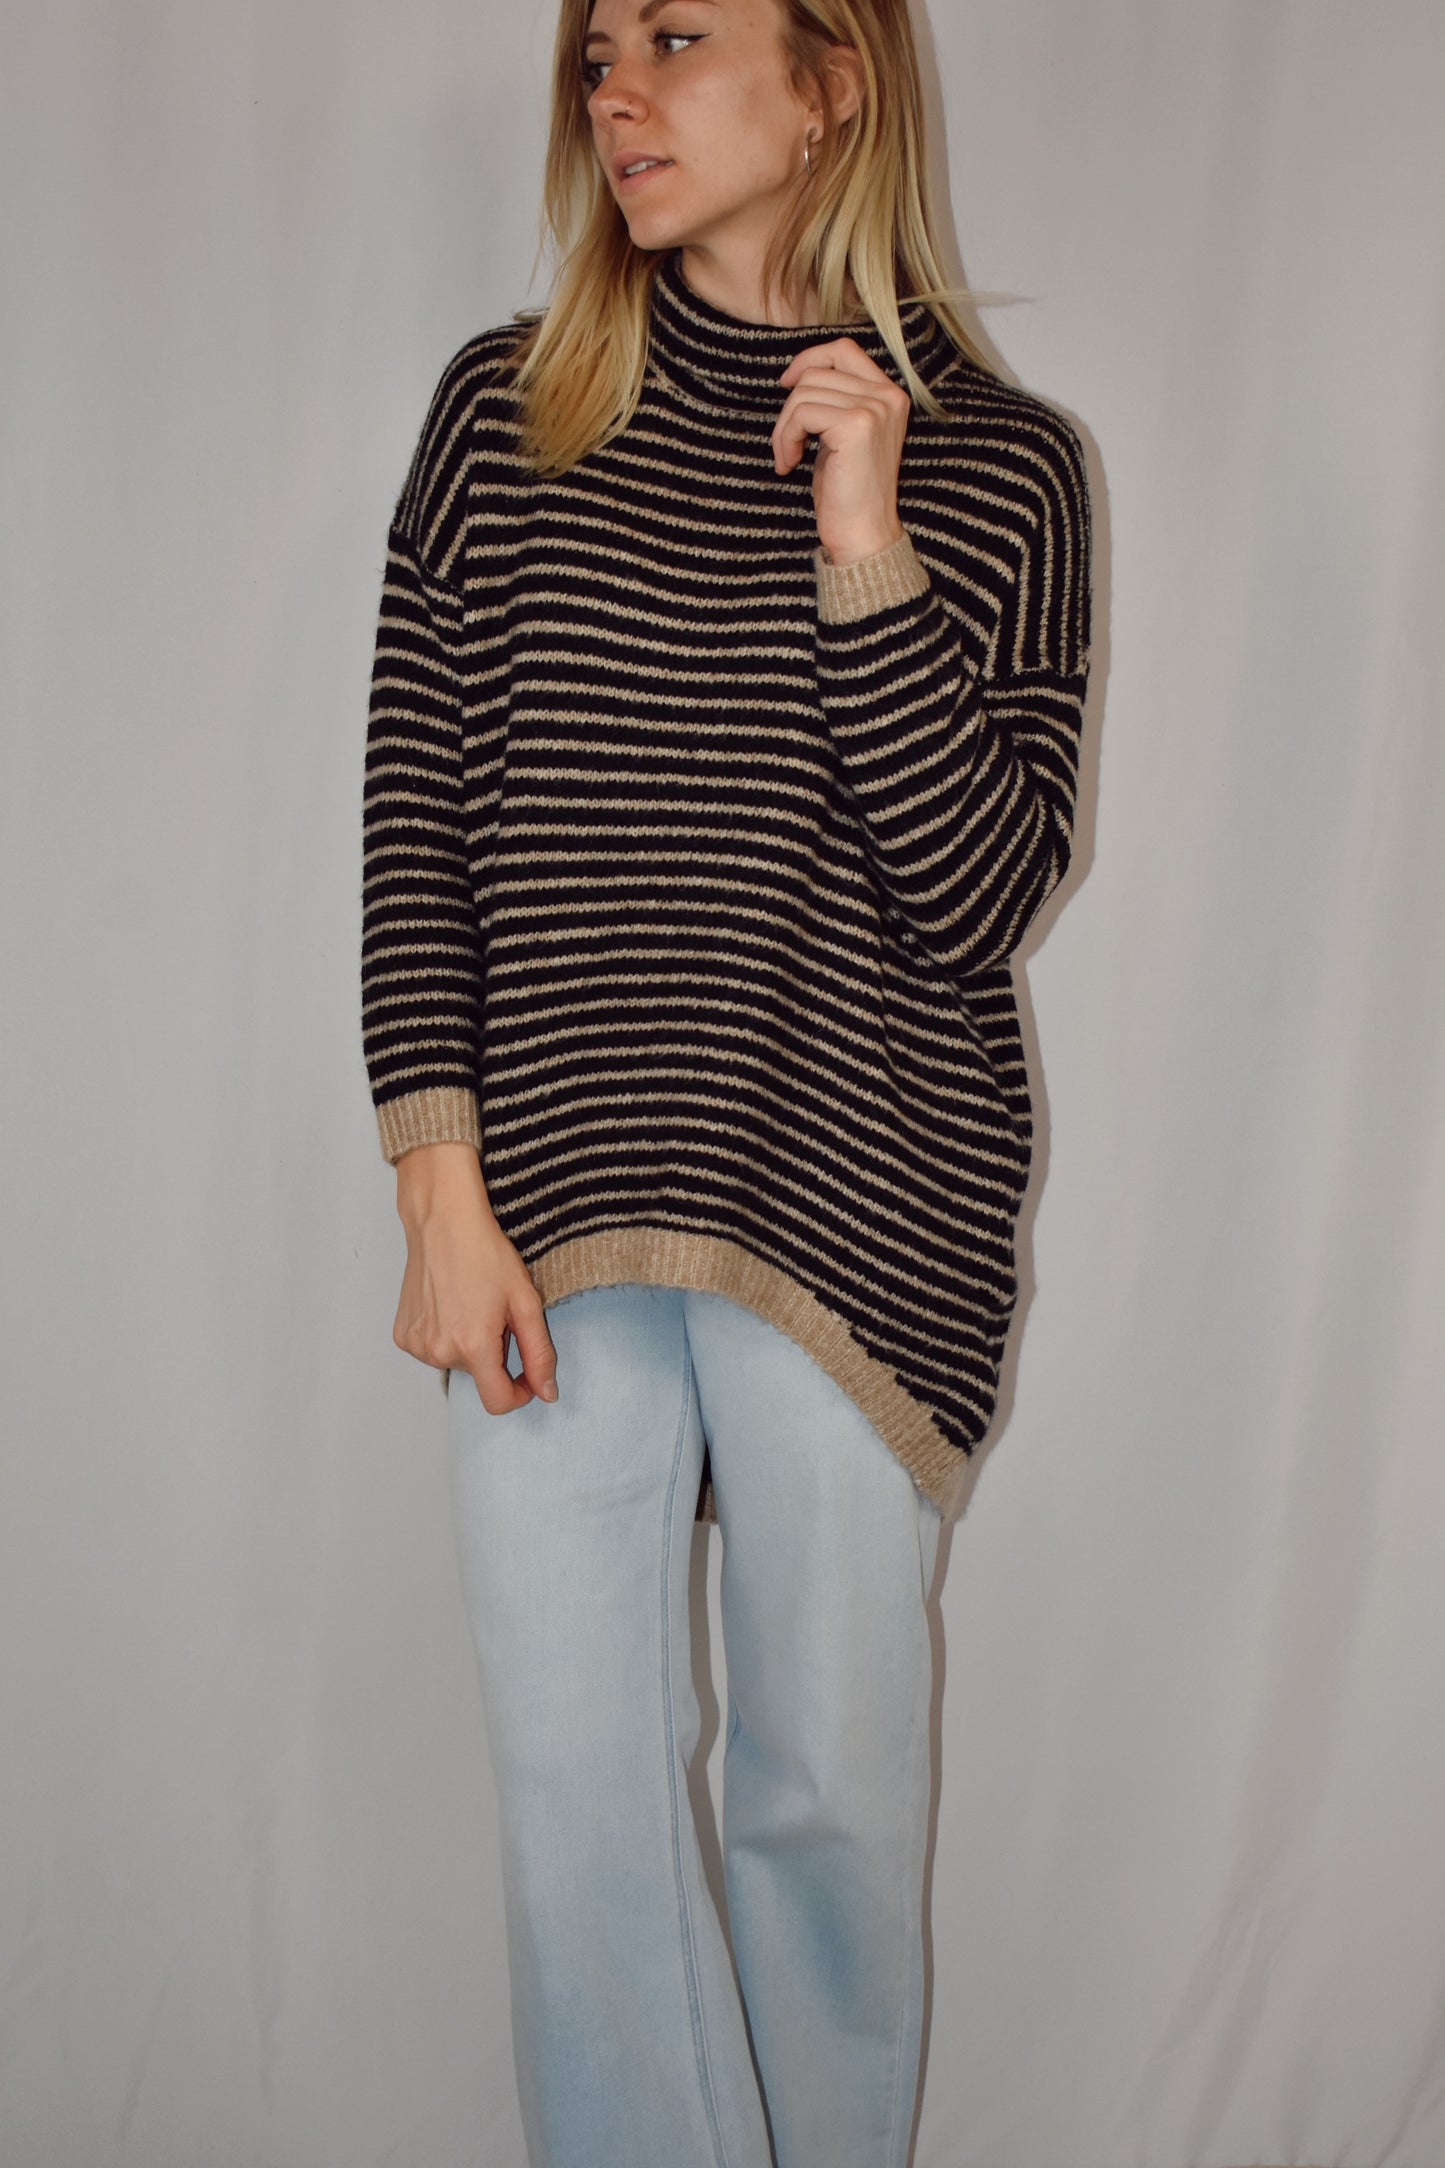 Pullover turtleneck striped sweater. Drop shoulder long sleeves, ribbed hem and sleeve cuffs, and high-low rounded hem. Black and taupe color.